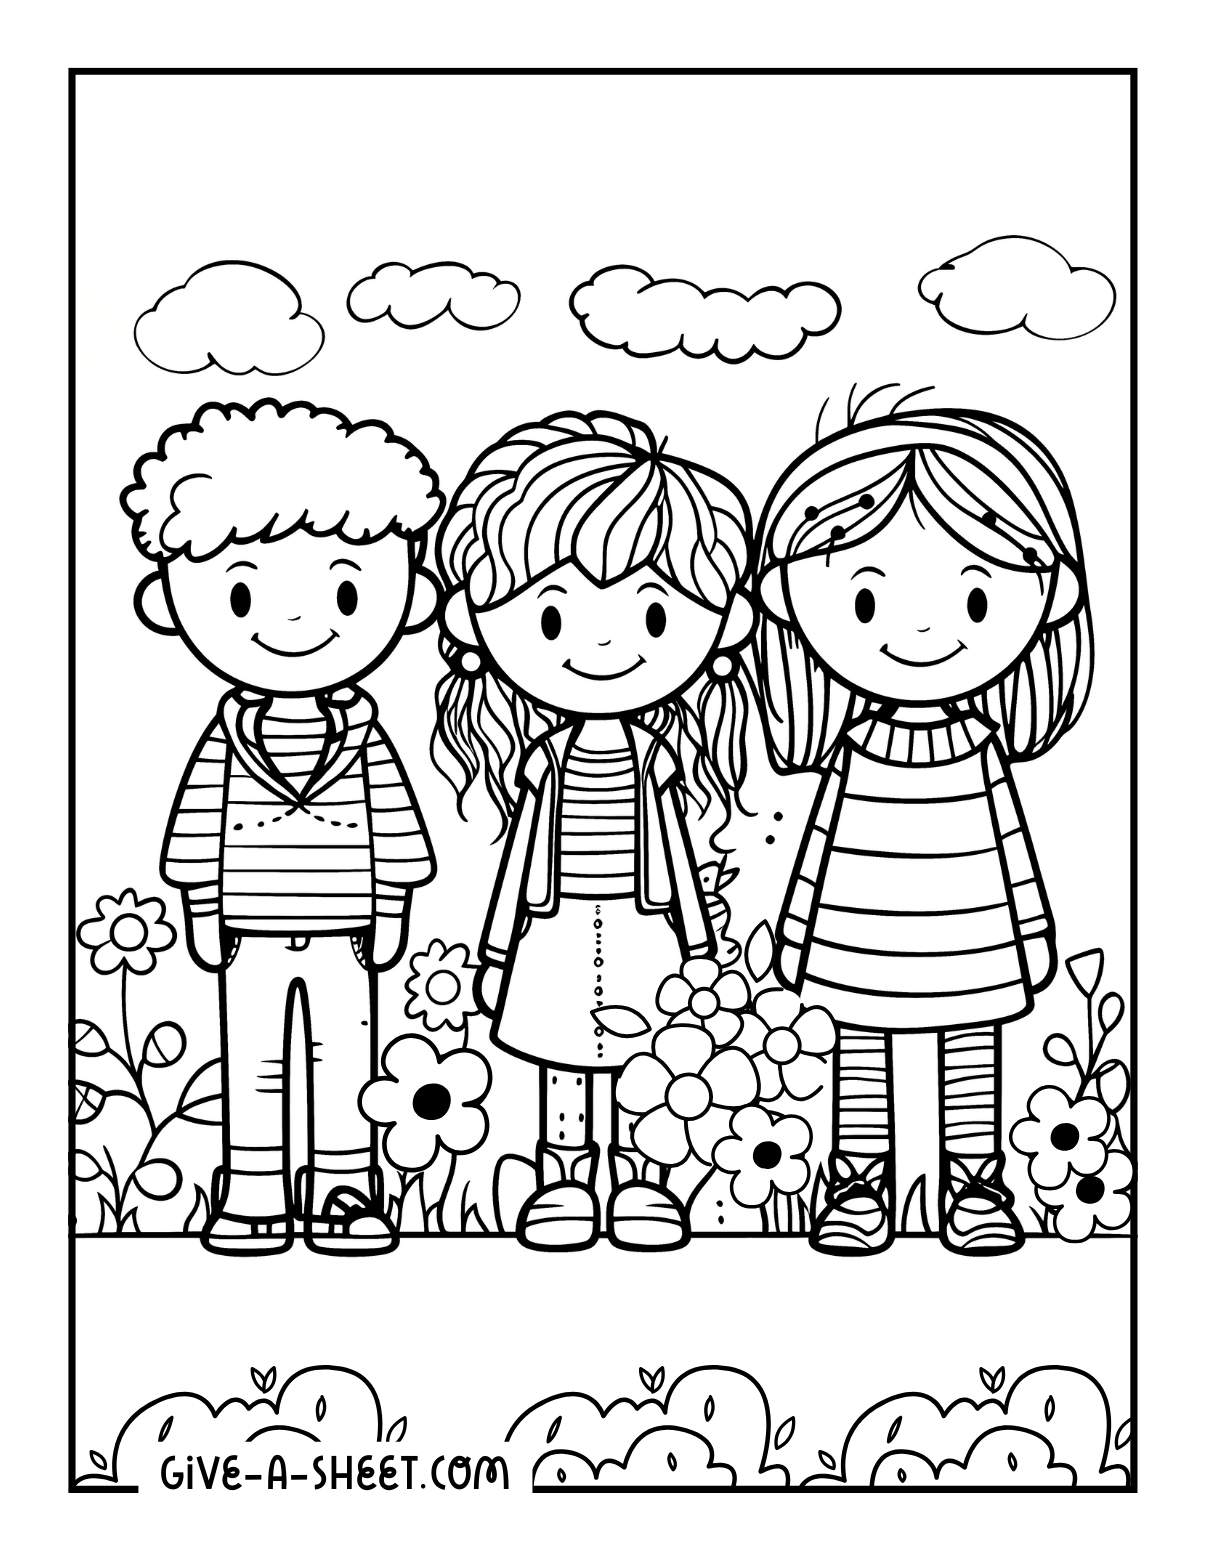 3 bff coloring page in the garden for grade schoolers.